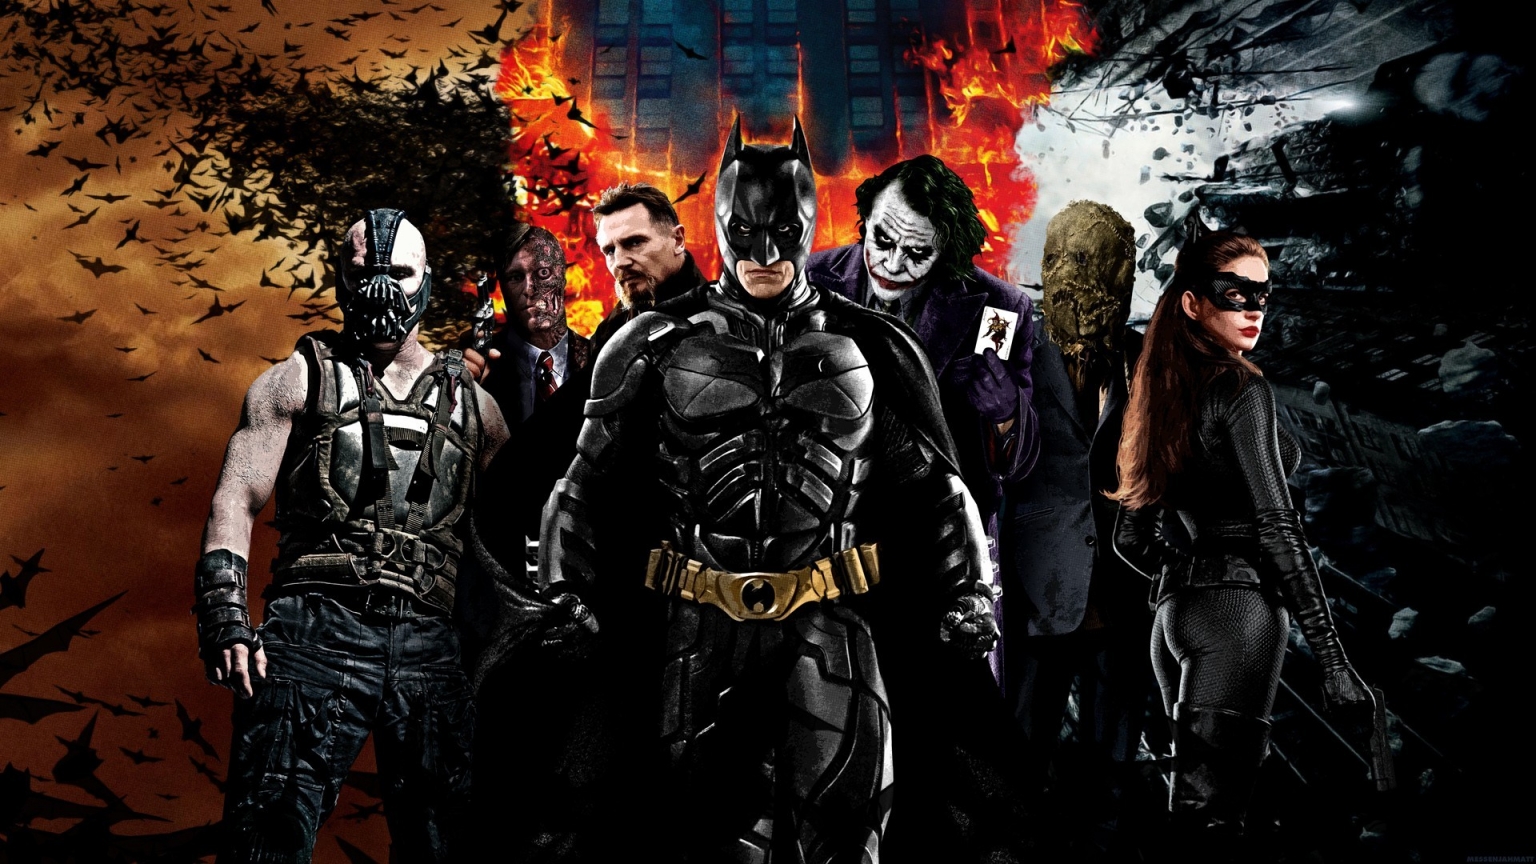 The Dark Knight Characters for 1536 x 864 HDTV resolution